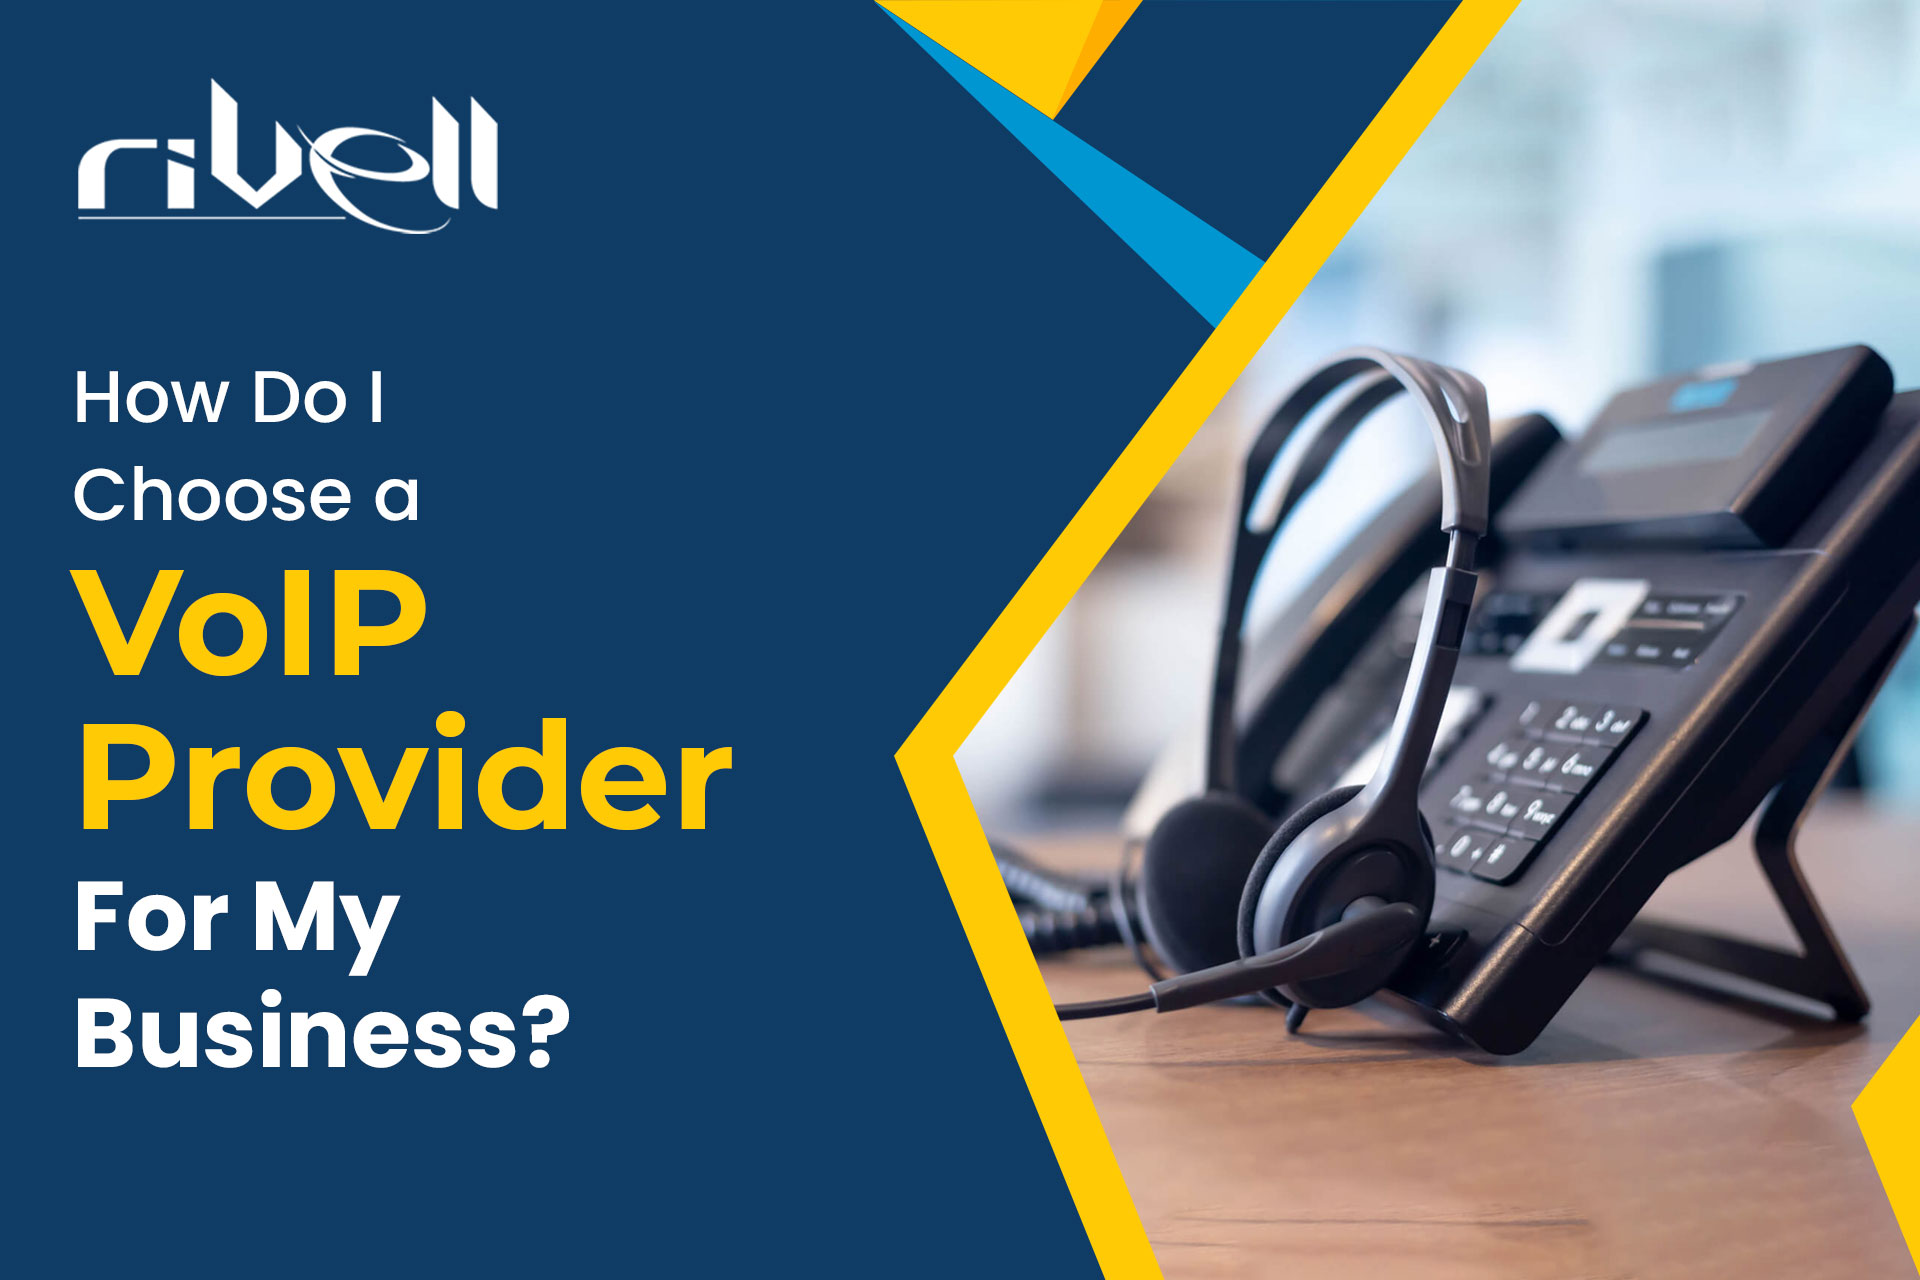 How do I choose a VoIP provider for my business